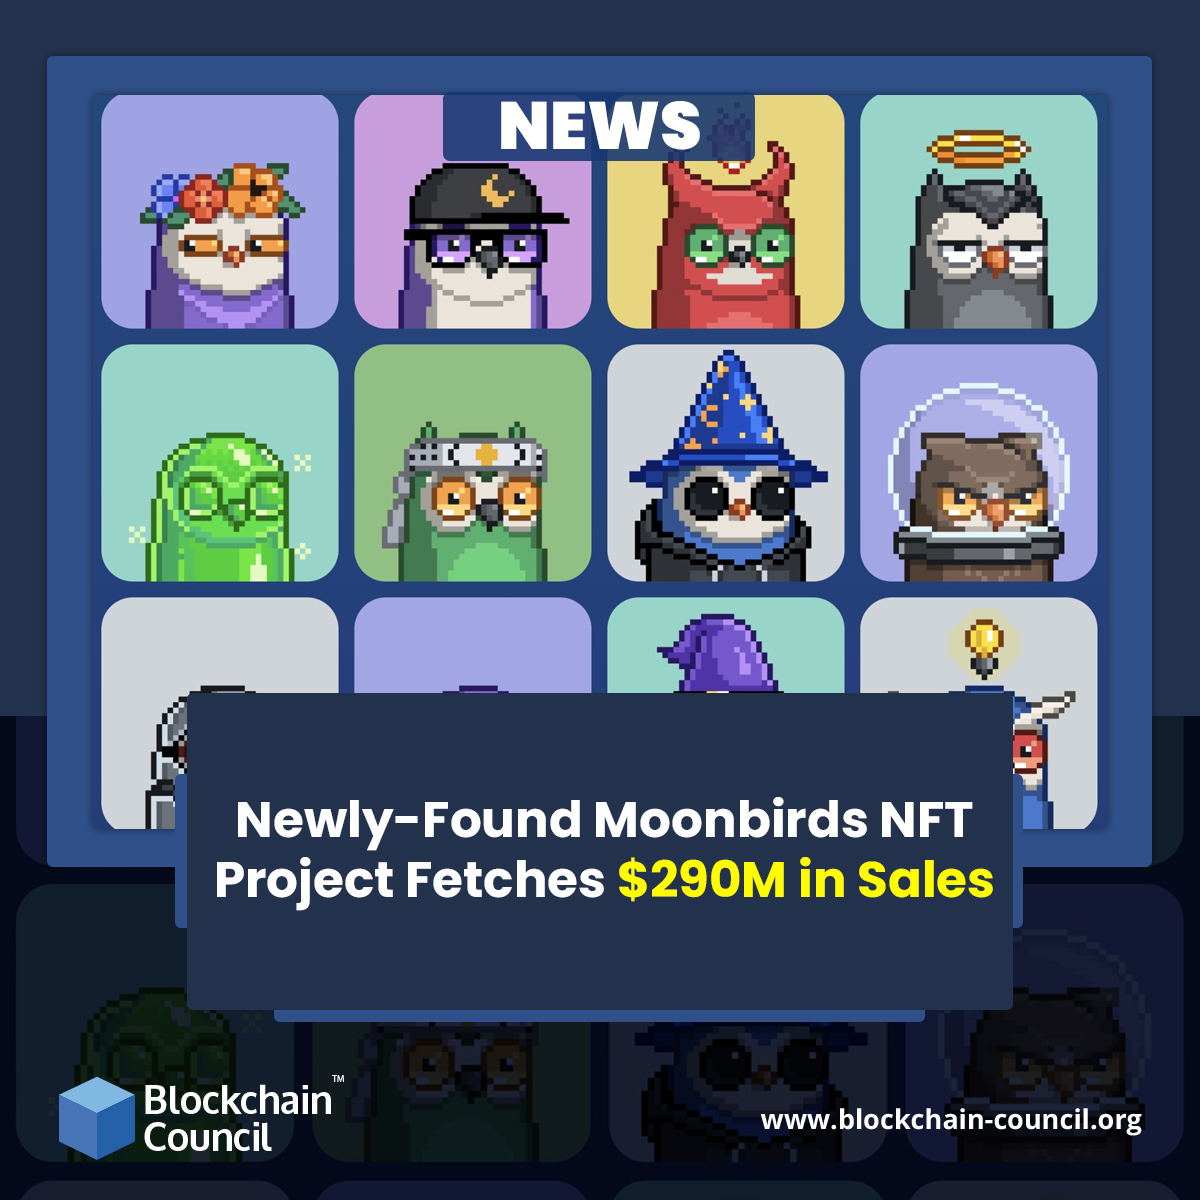 Newly-Found Moonbirds NFT Project Fetches $290M in Sales